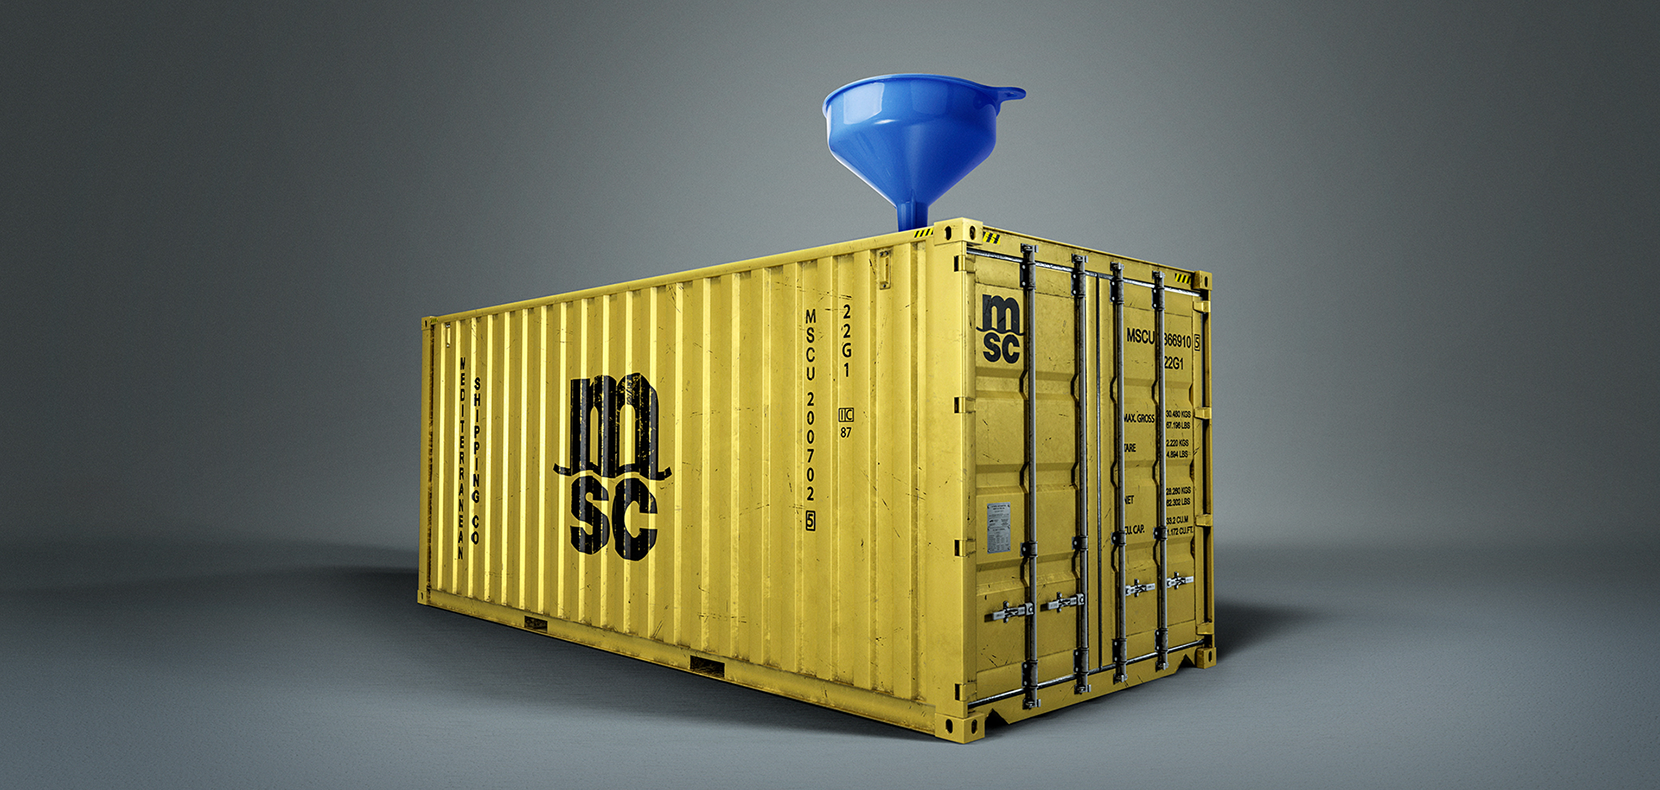 MSC Becomes First Carrier to offer in house Liquid Cargo Solutions